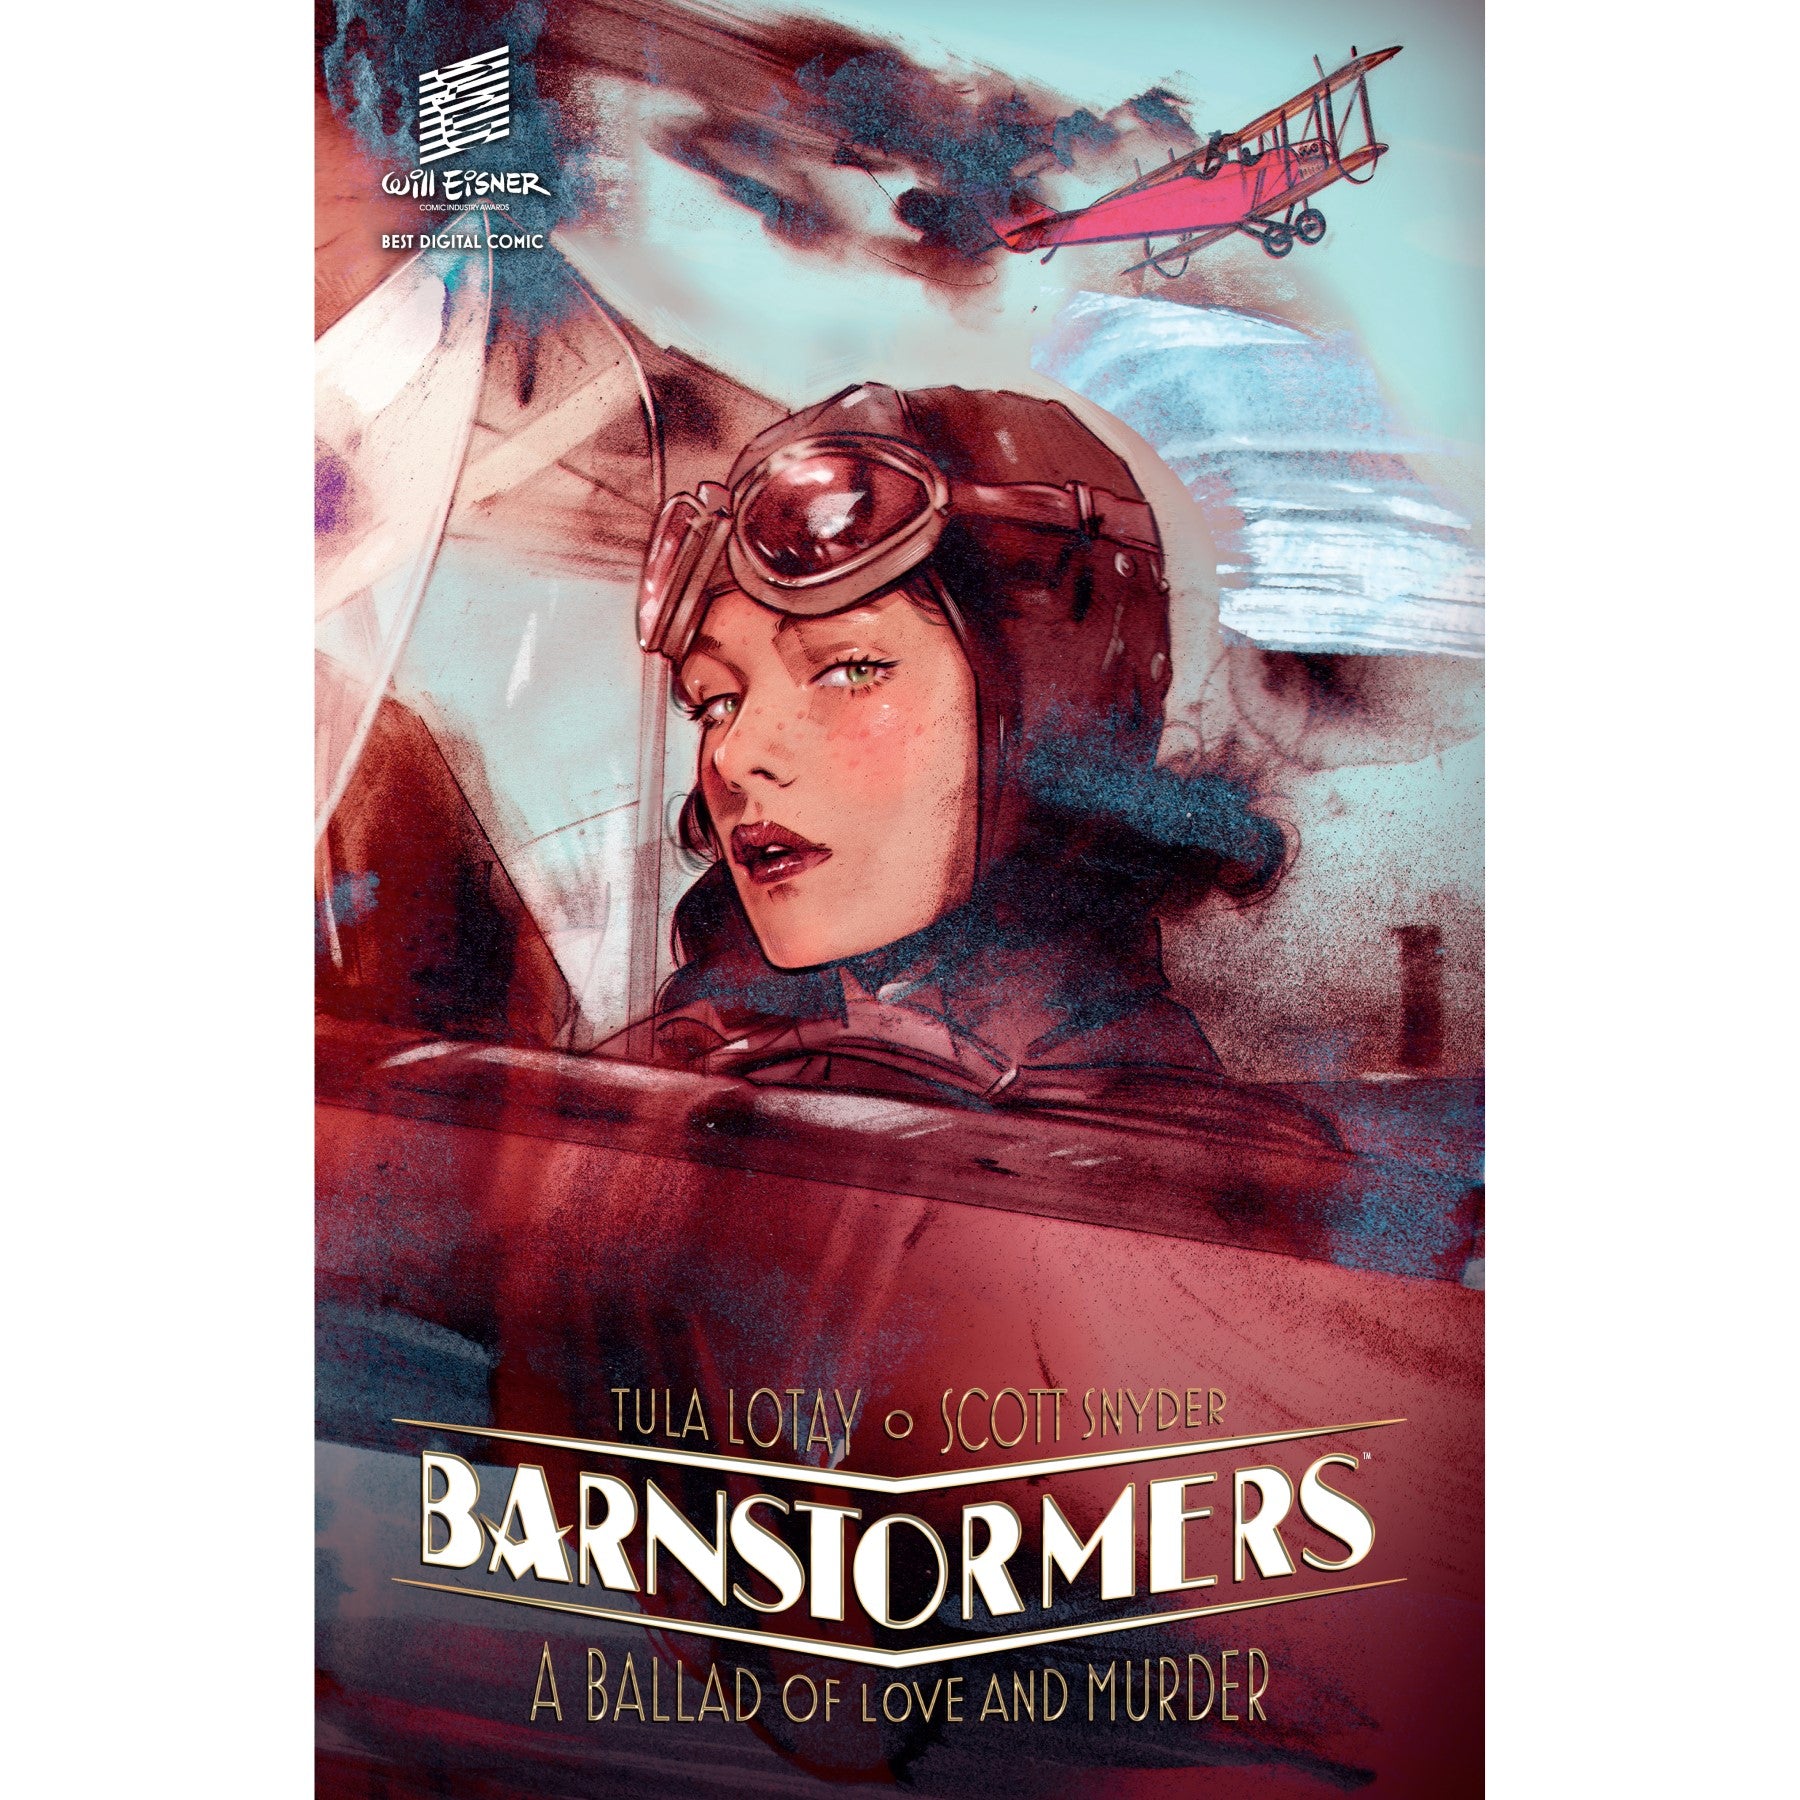 Barnstormers A Ballad of Love and Murder